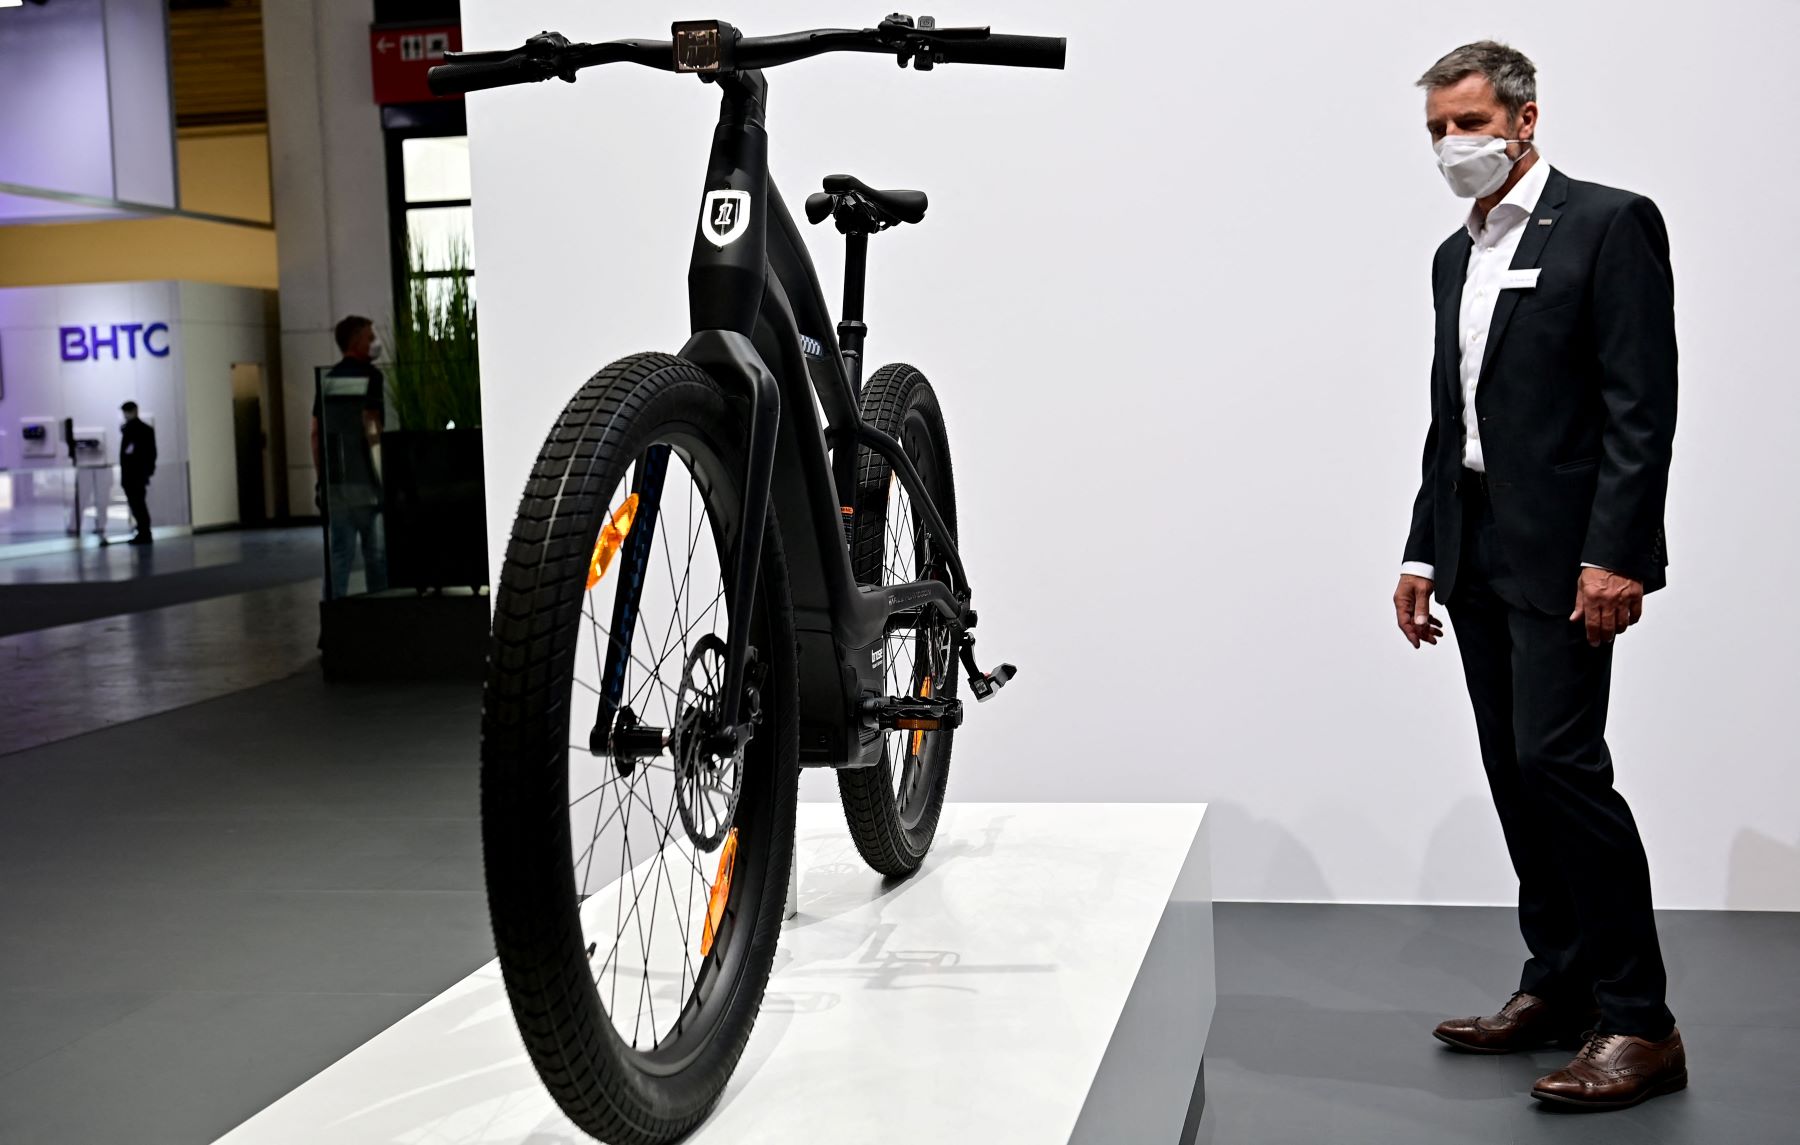 The Harley-Davidson Serial 1 e-bike presented during a press preview at the International Motor Show (IAA)